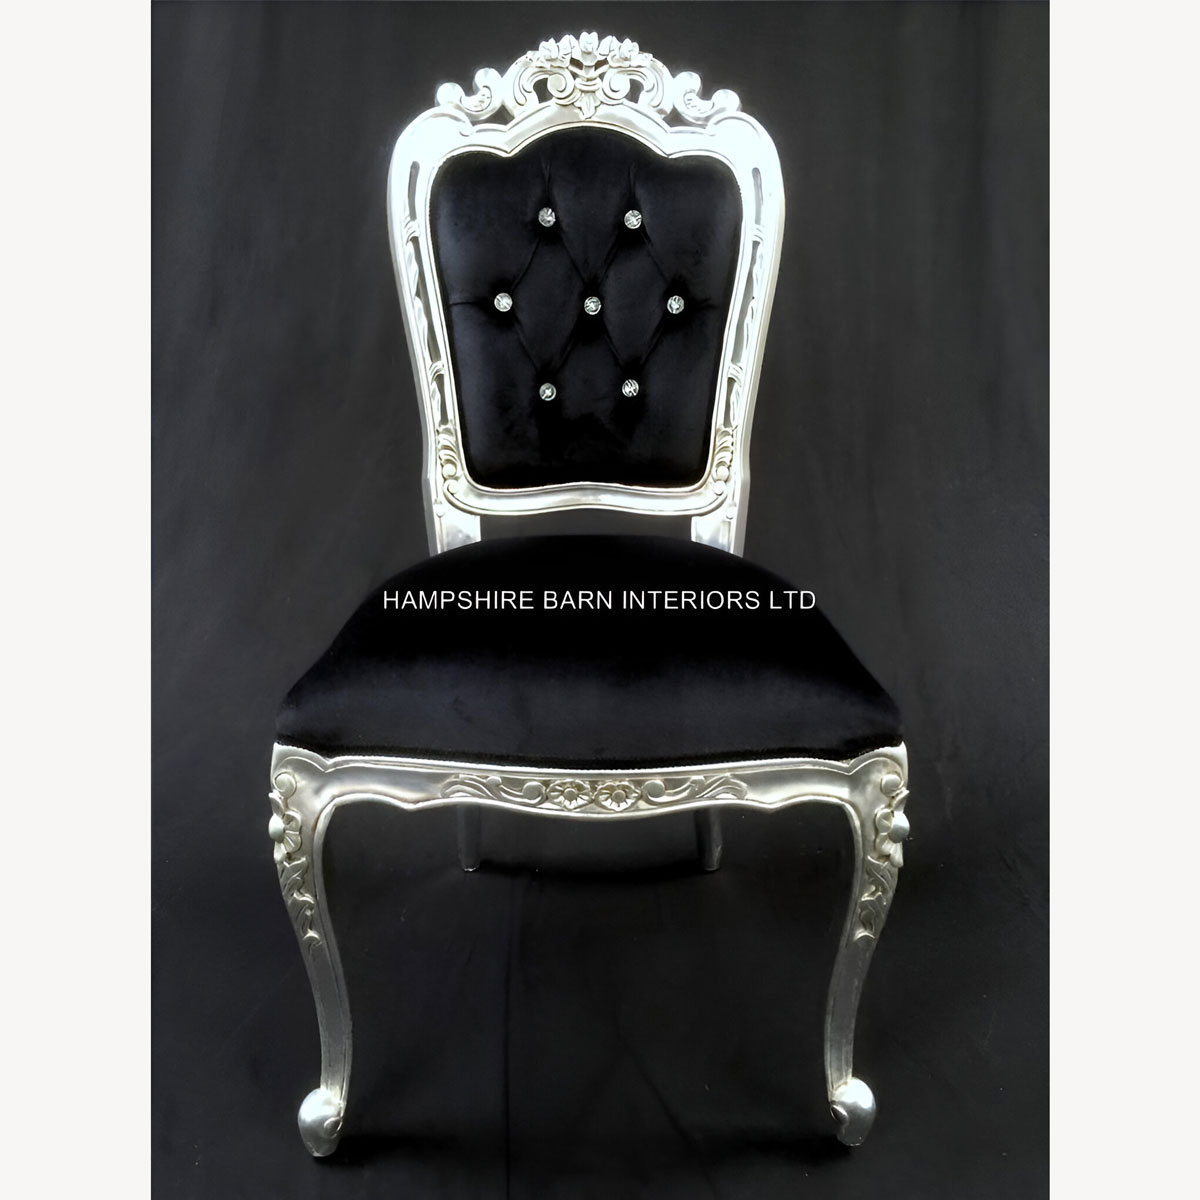 Franciscan Chair In Silver Leaf Black Velvet And Crystals Dining Or Occasional 1 - Hampshire Barn Interiors - Franciscan Chair In Silver Leaf Black Velvet And Crystals (Dining Or Occasional) -